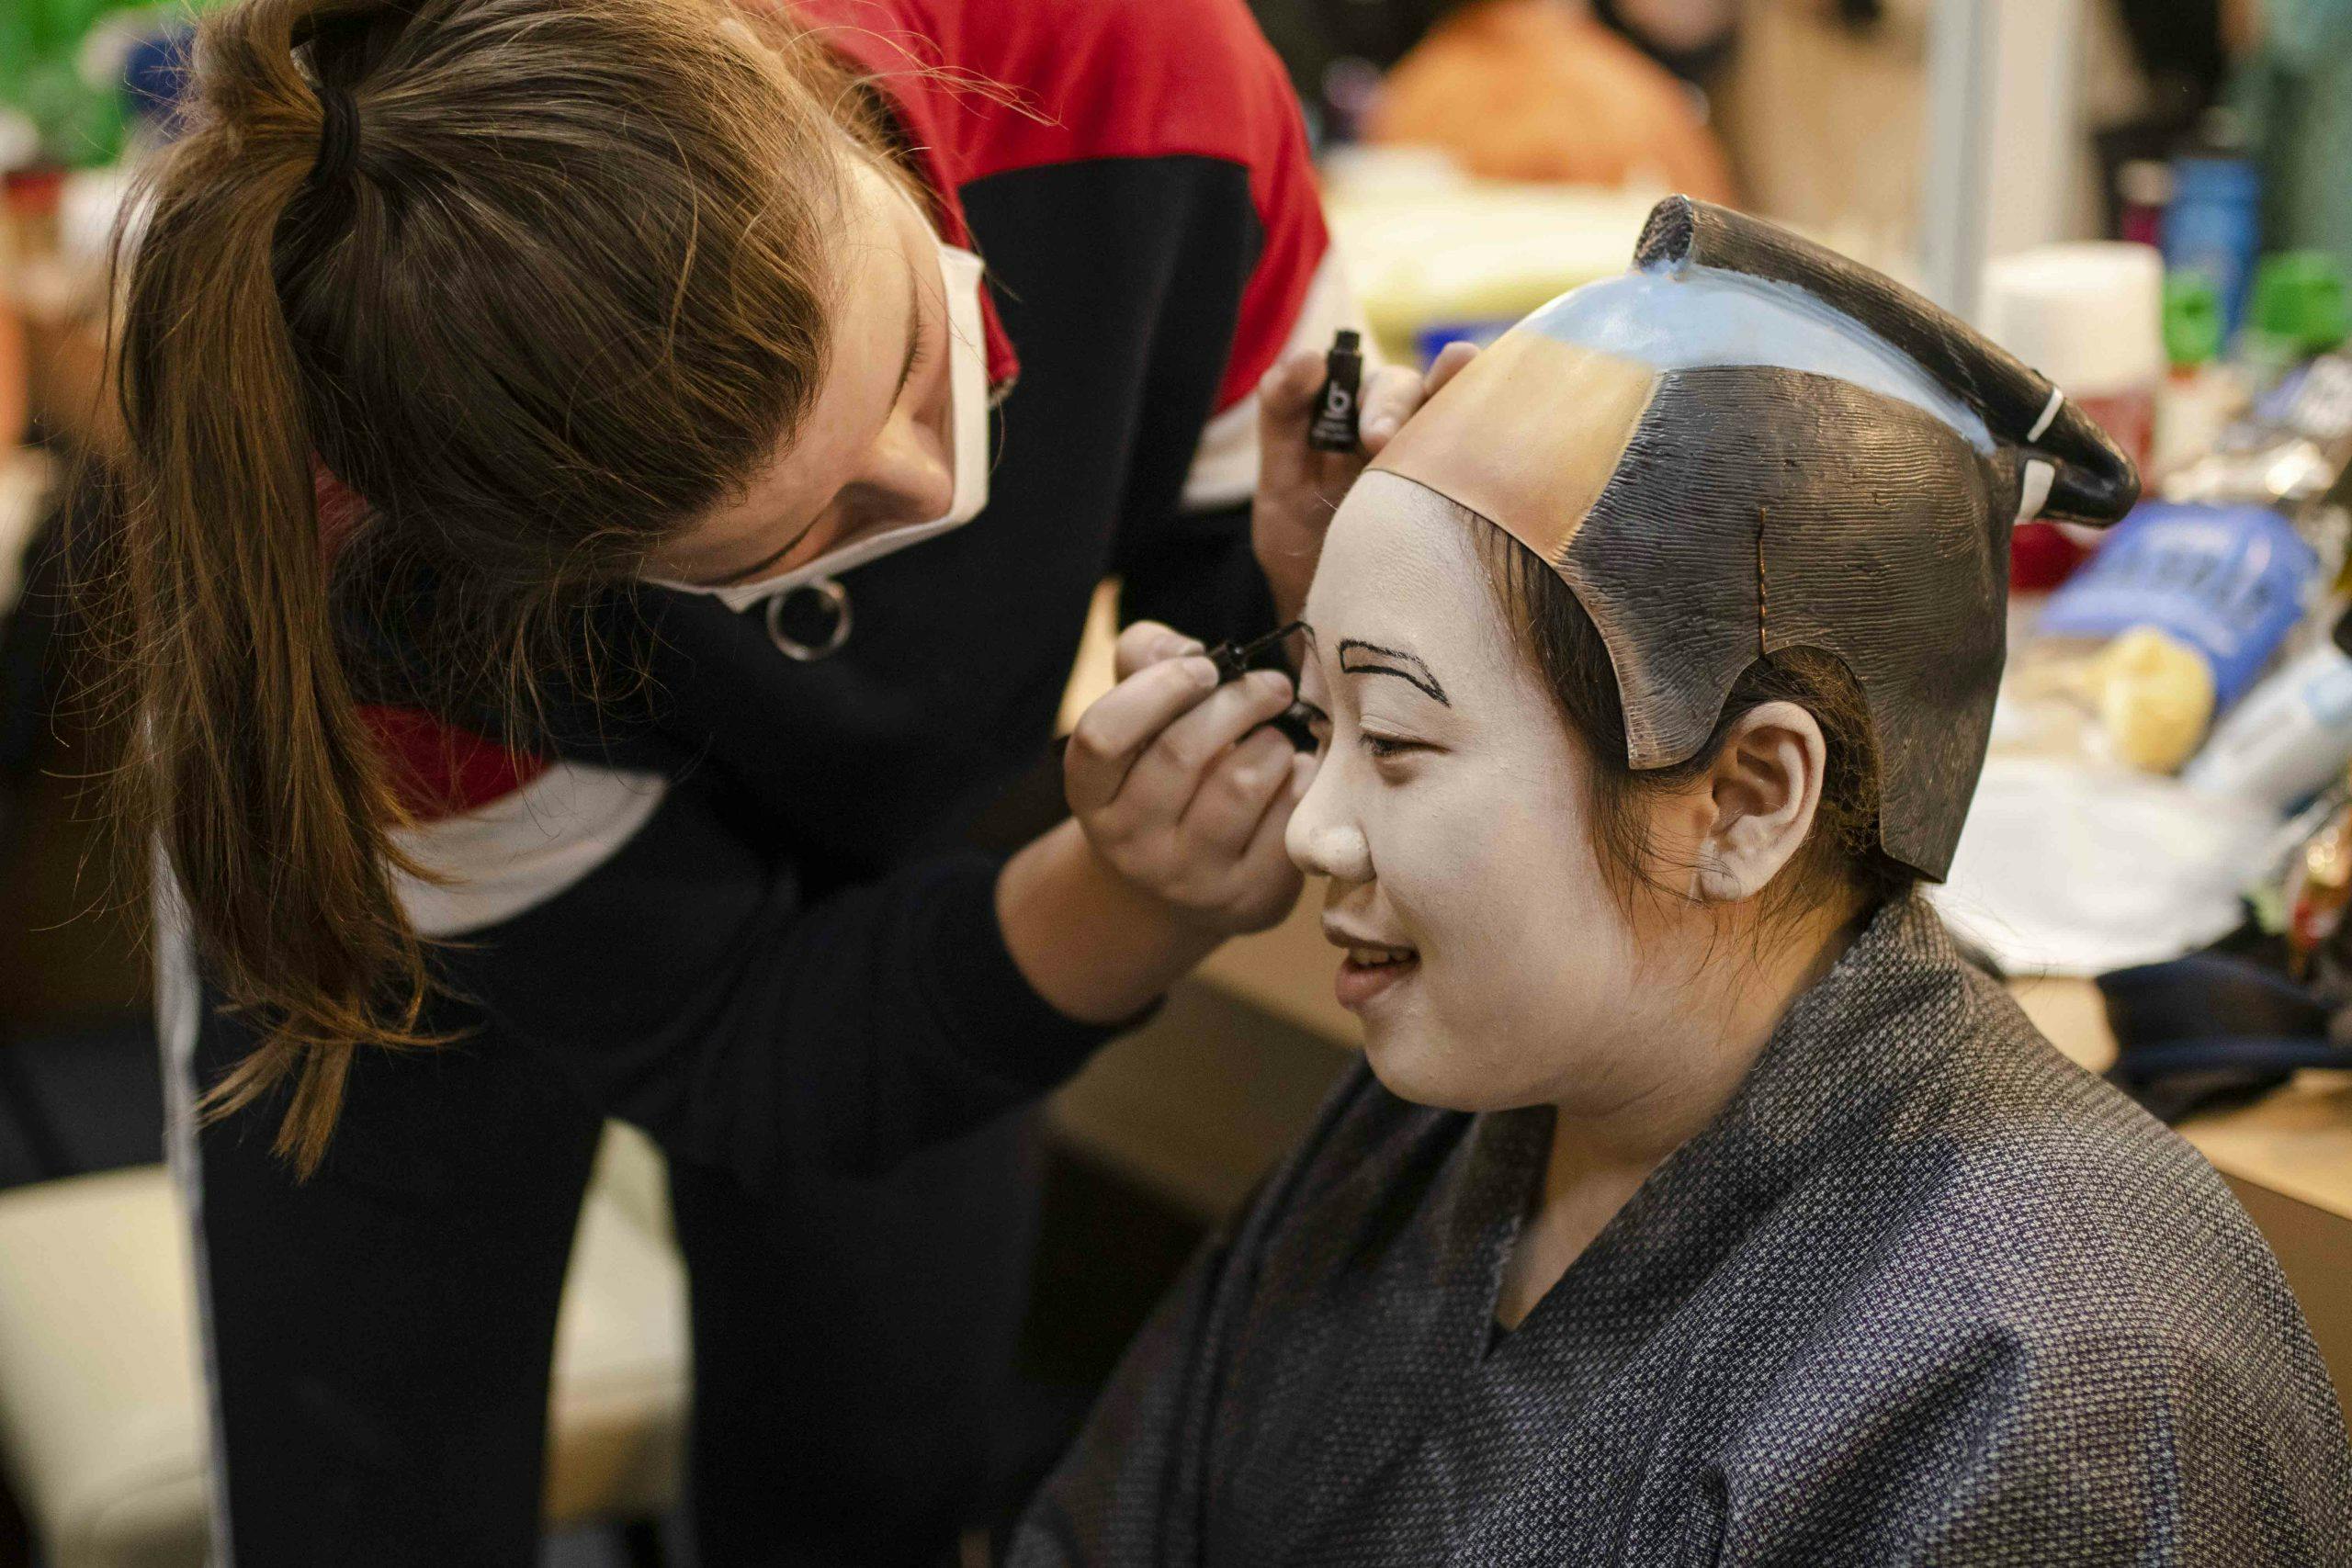 a woman in a mask is bending down and painting black eyebrows on a woman's face. The woman having her makeup done is wearing a kabuki costume and has her face painted white